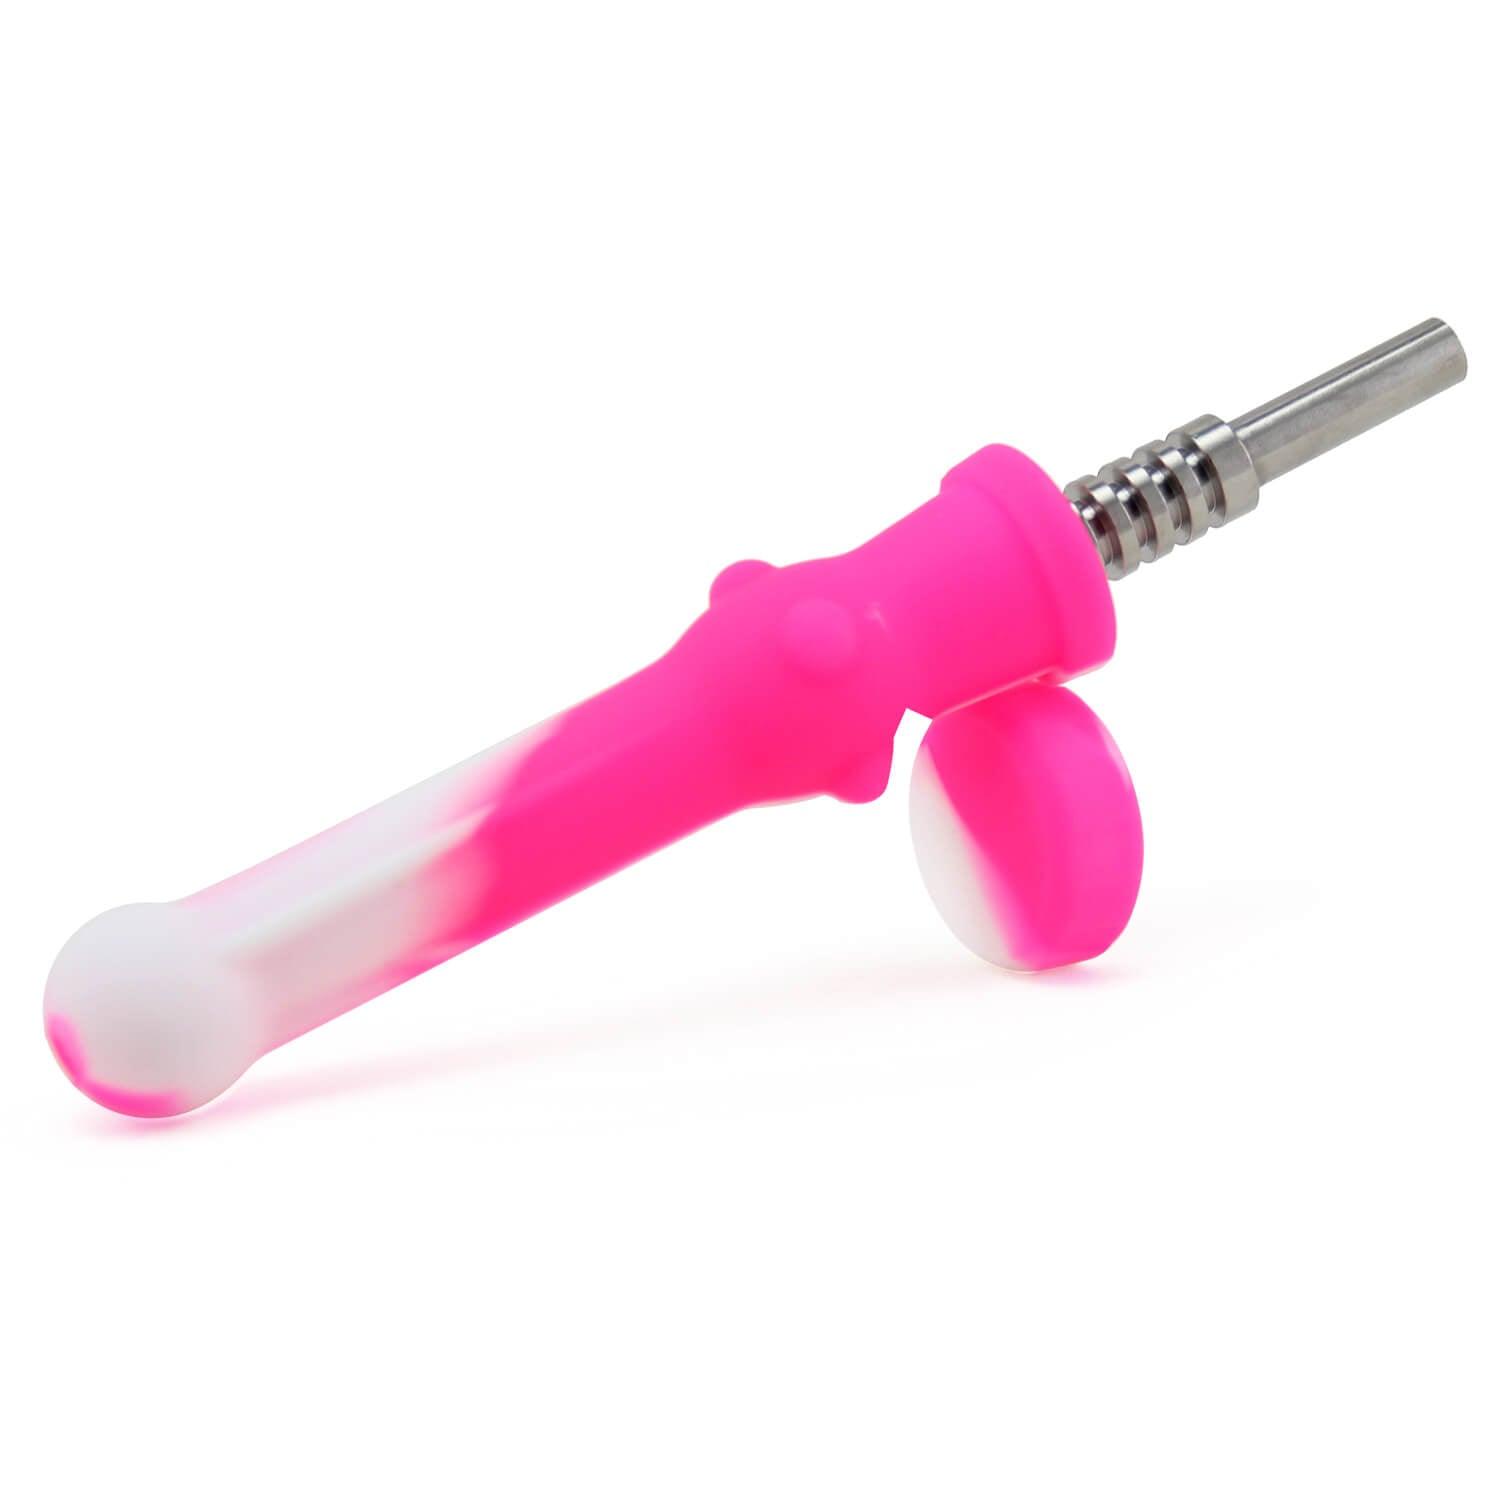 Silicone Nectar Collector Dab - PILOT DIARY